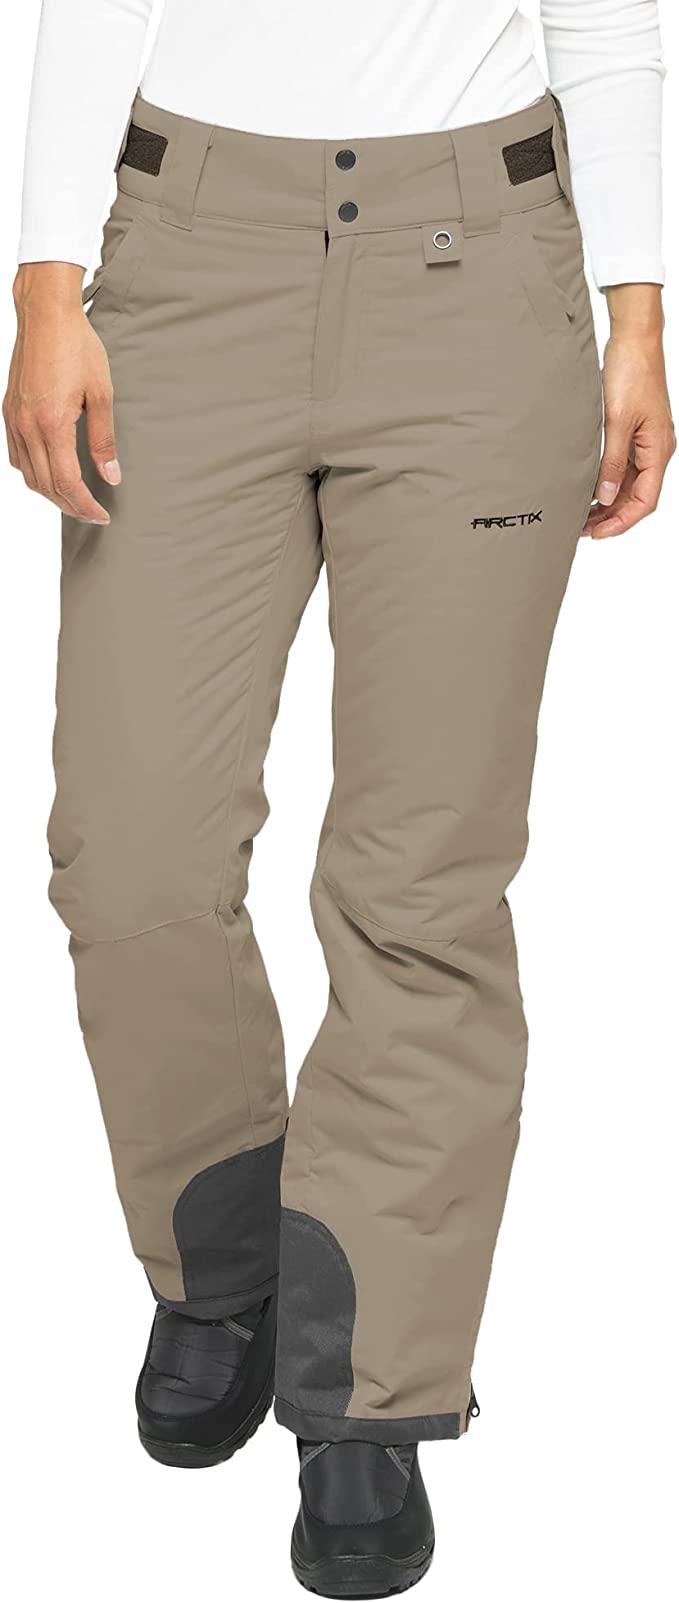 Women's Insulated Snow Pants 